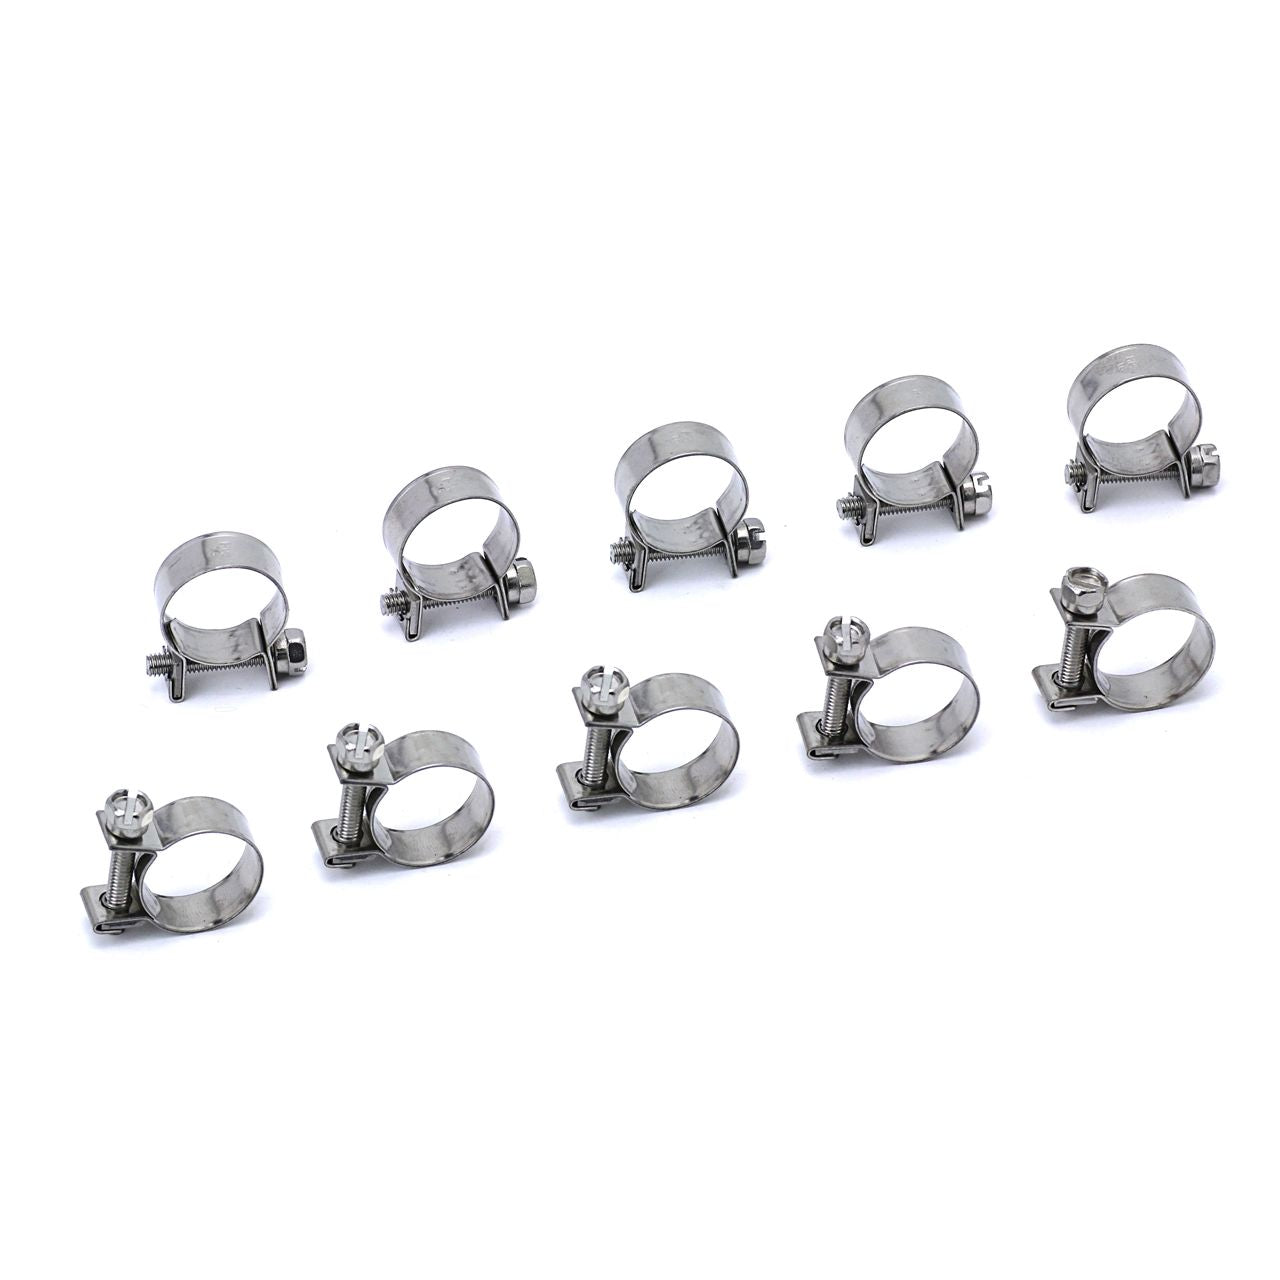 HPS #17 Stainless Steel Fuel Injection Hose Clamps 10pc Pack 19/32" - 43/64" (15mm - 17mm)